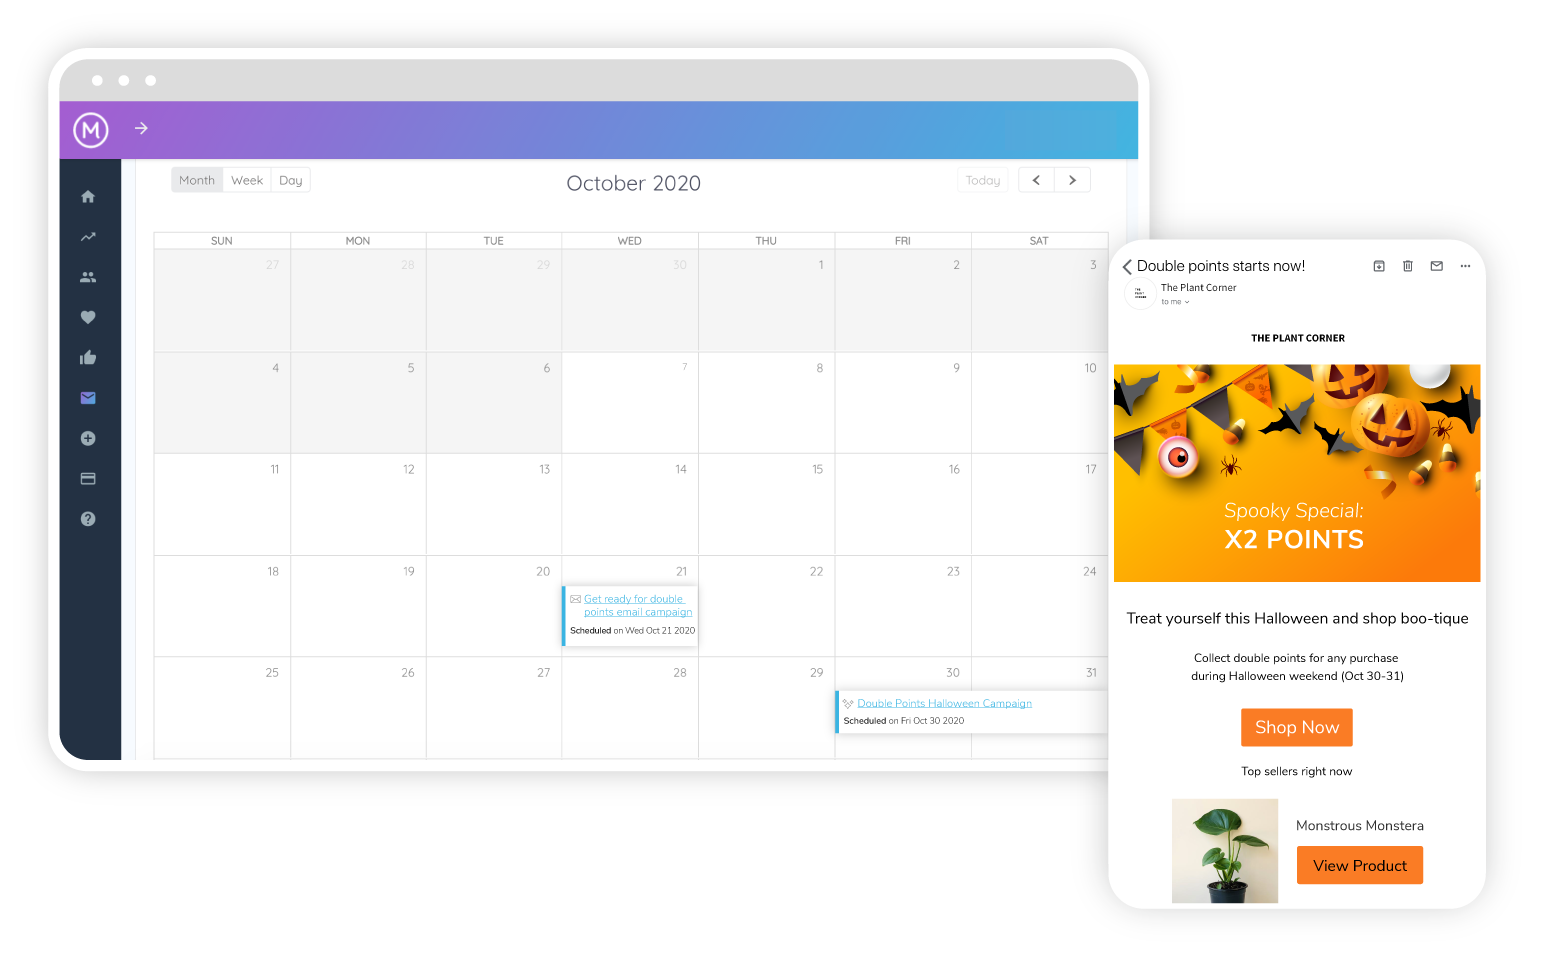 Marsello marketing calendar with halloween promotions scheduled.